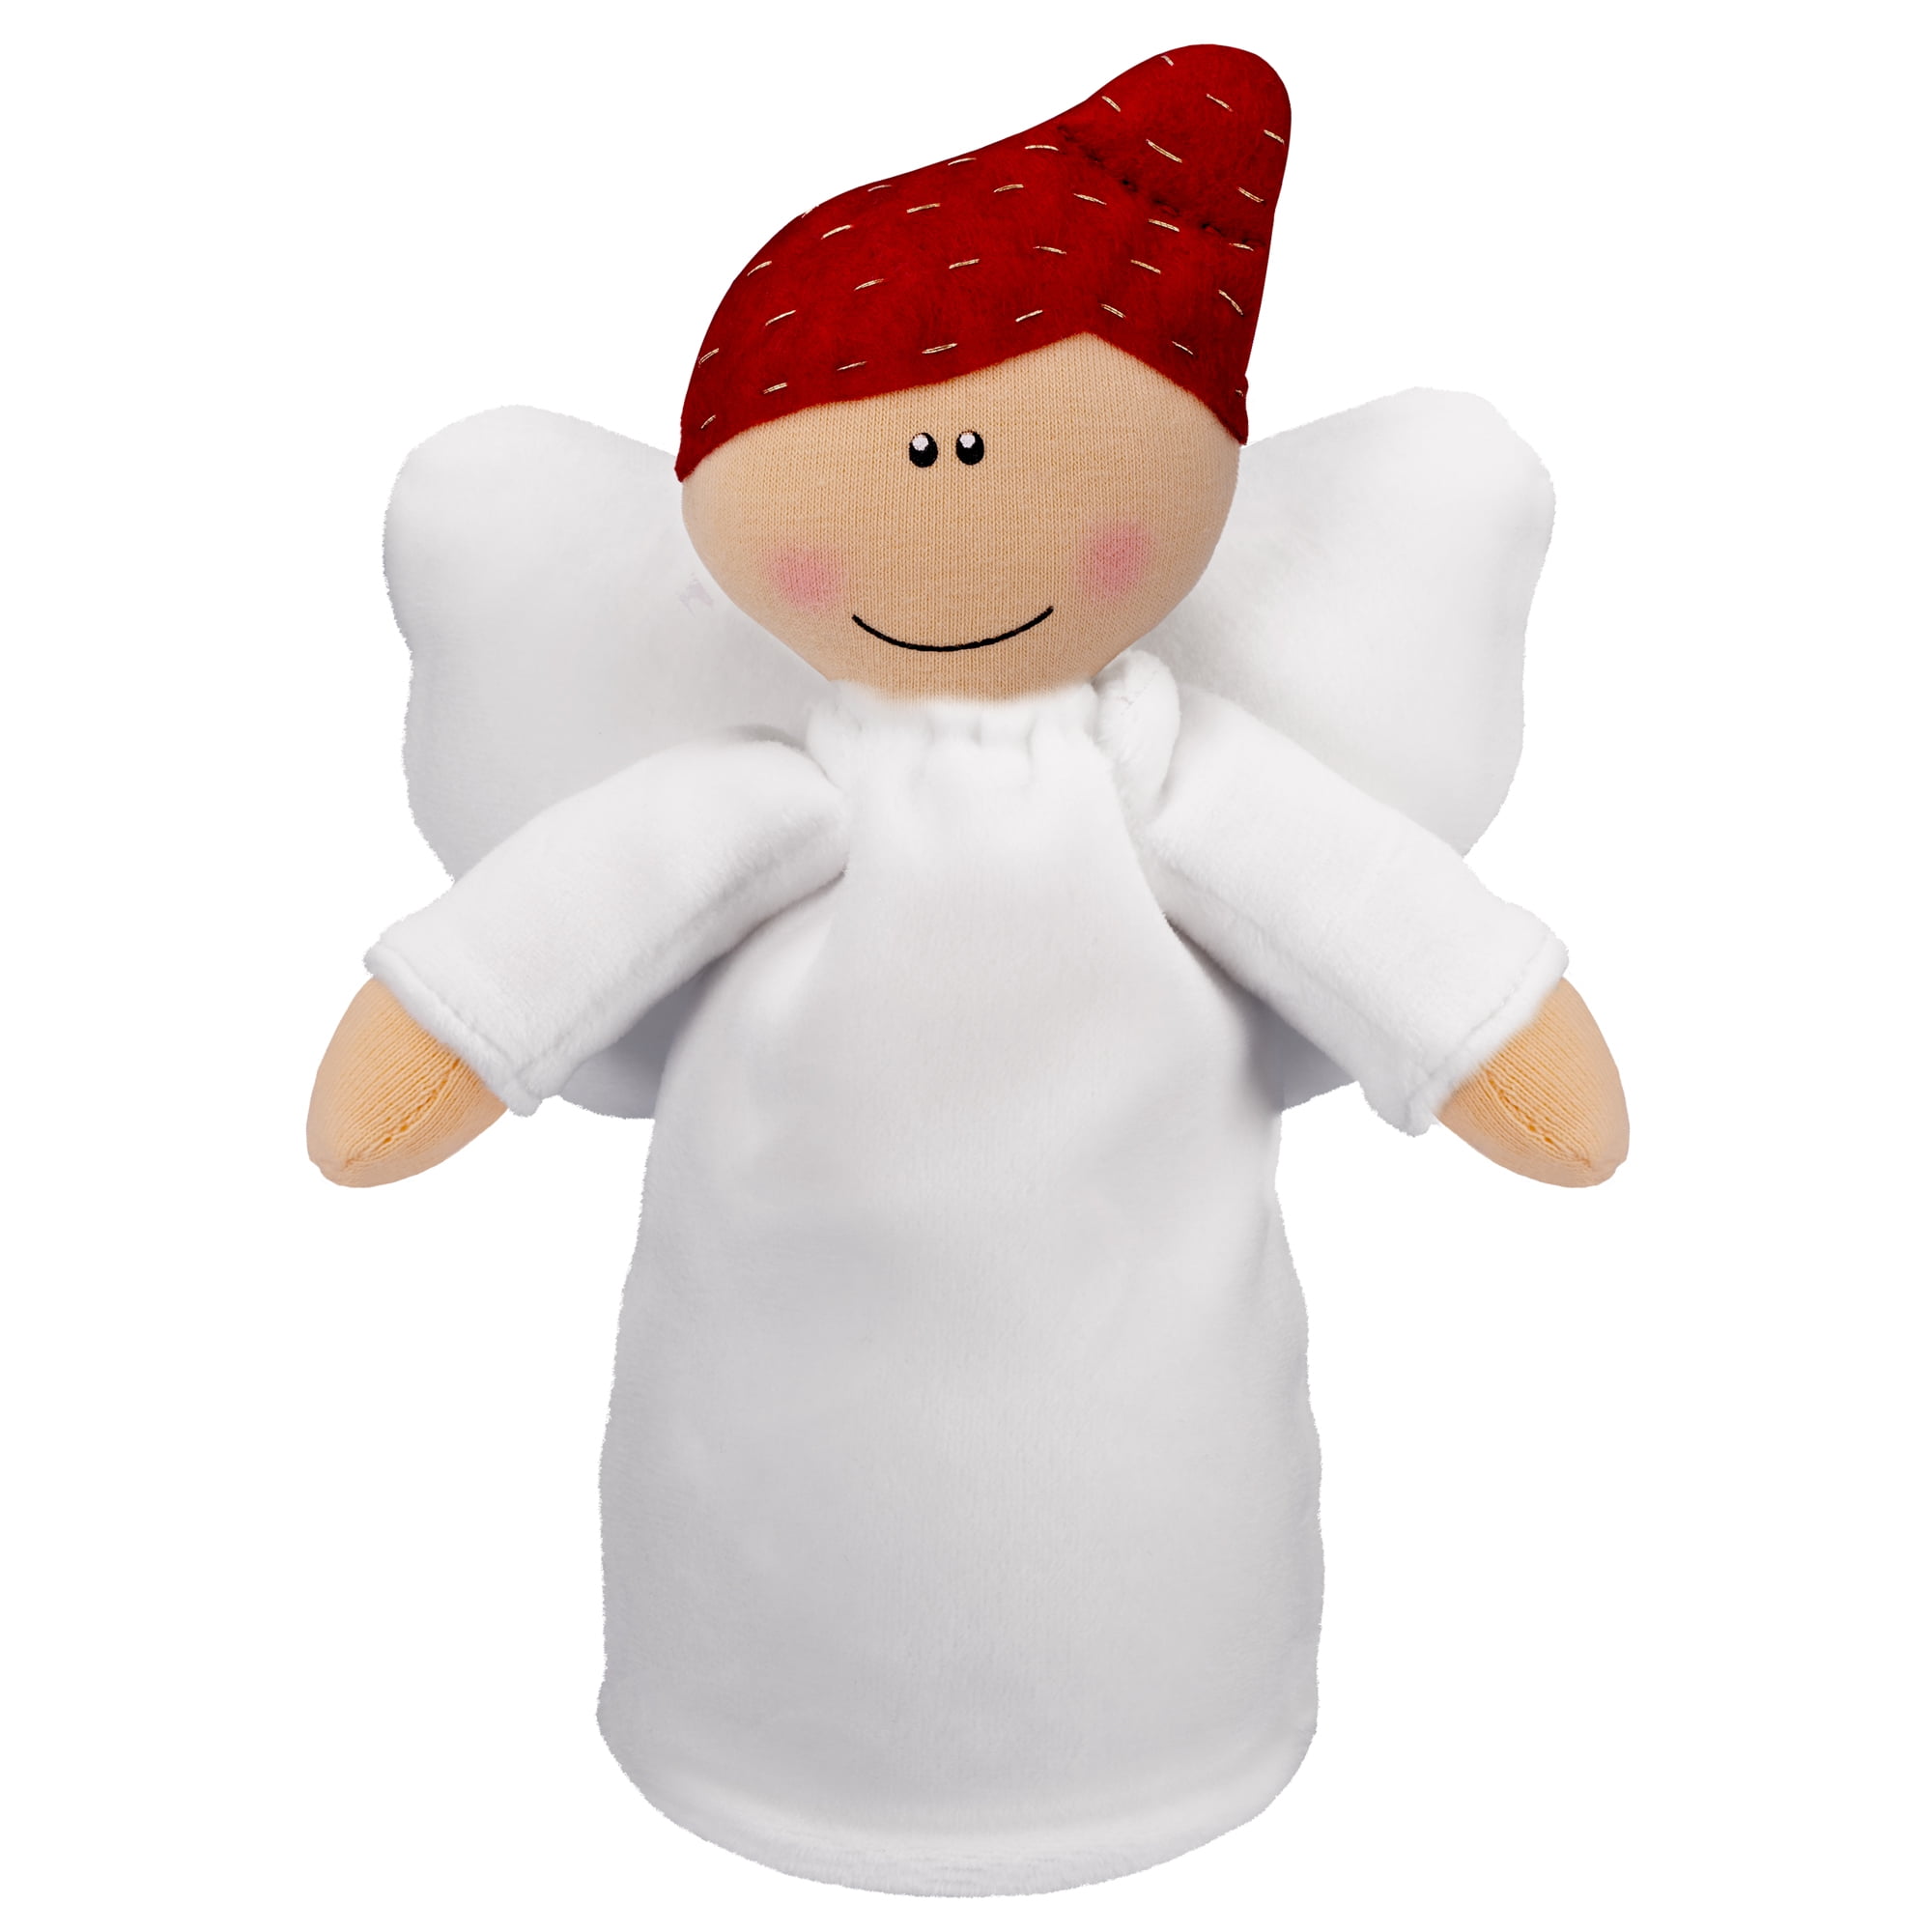 12 angel figures for christening souvenirs 3.5 inch magnetic 